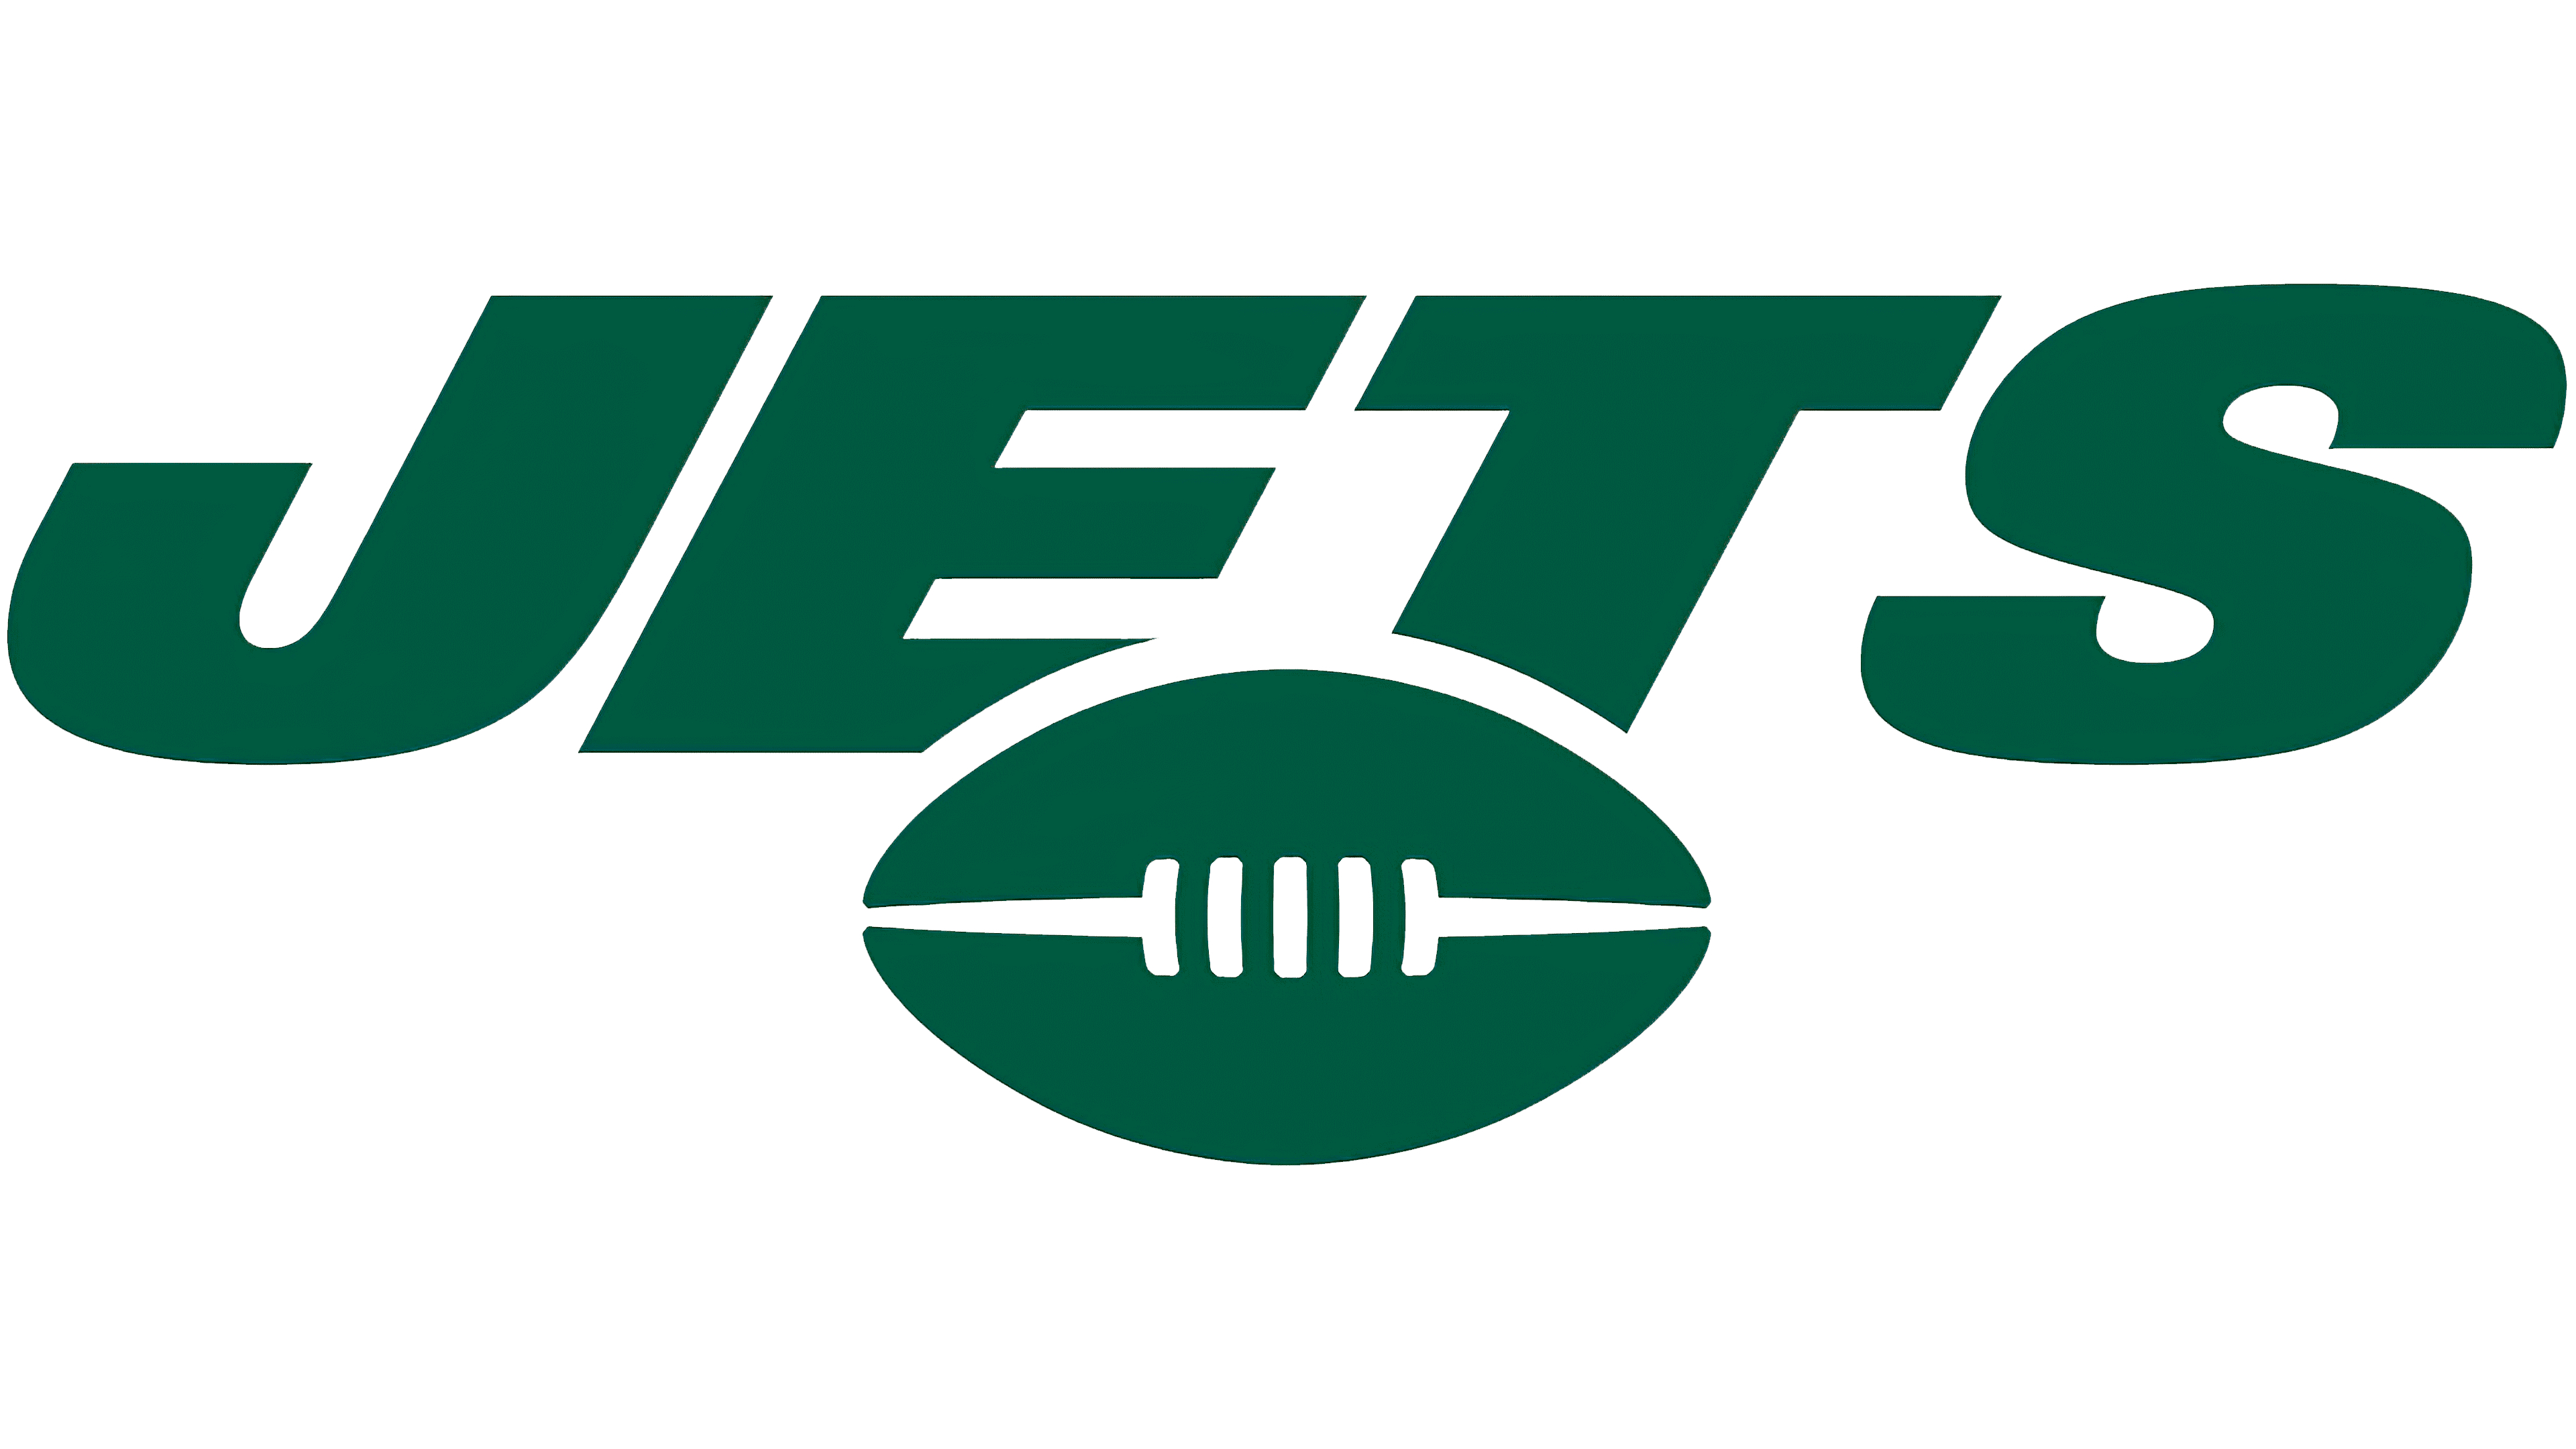 3840x2160 New York Jets logo and symbol, meaning, history, PNG